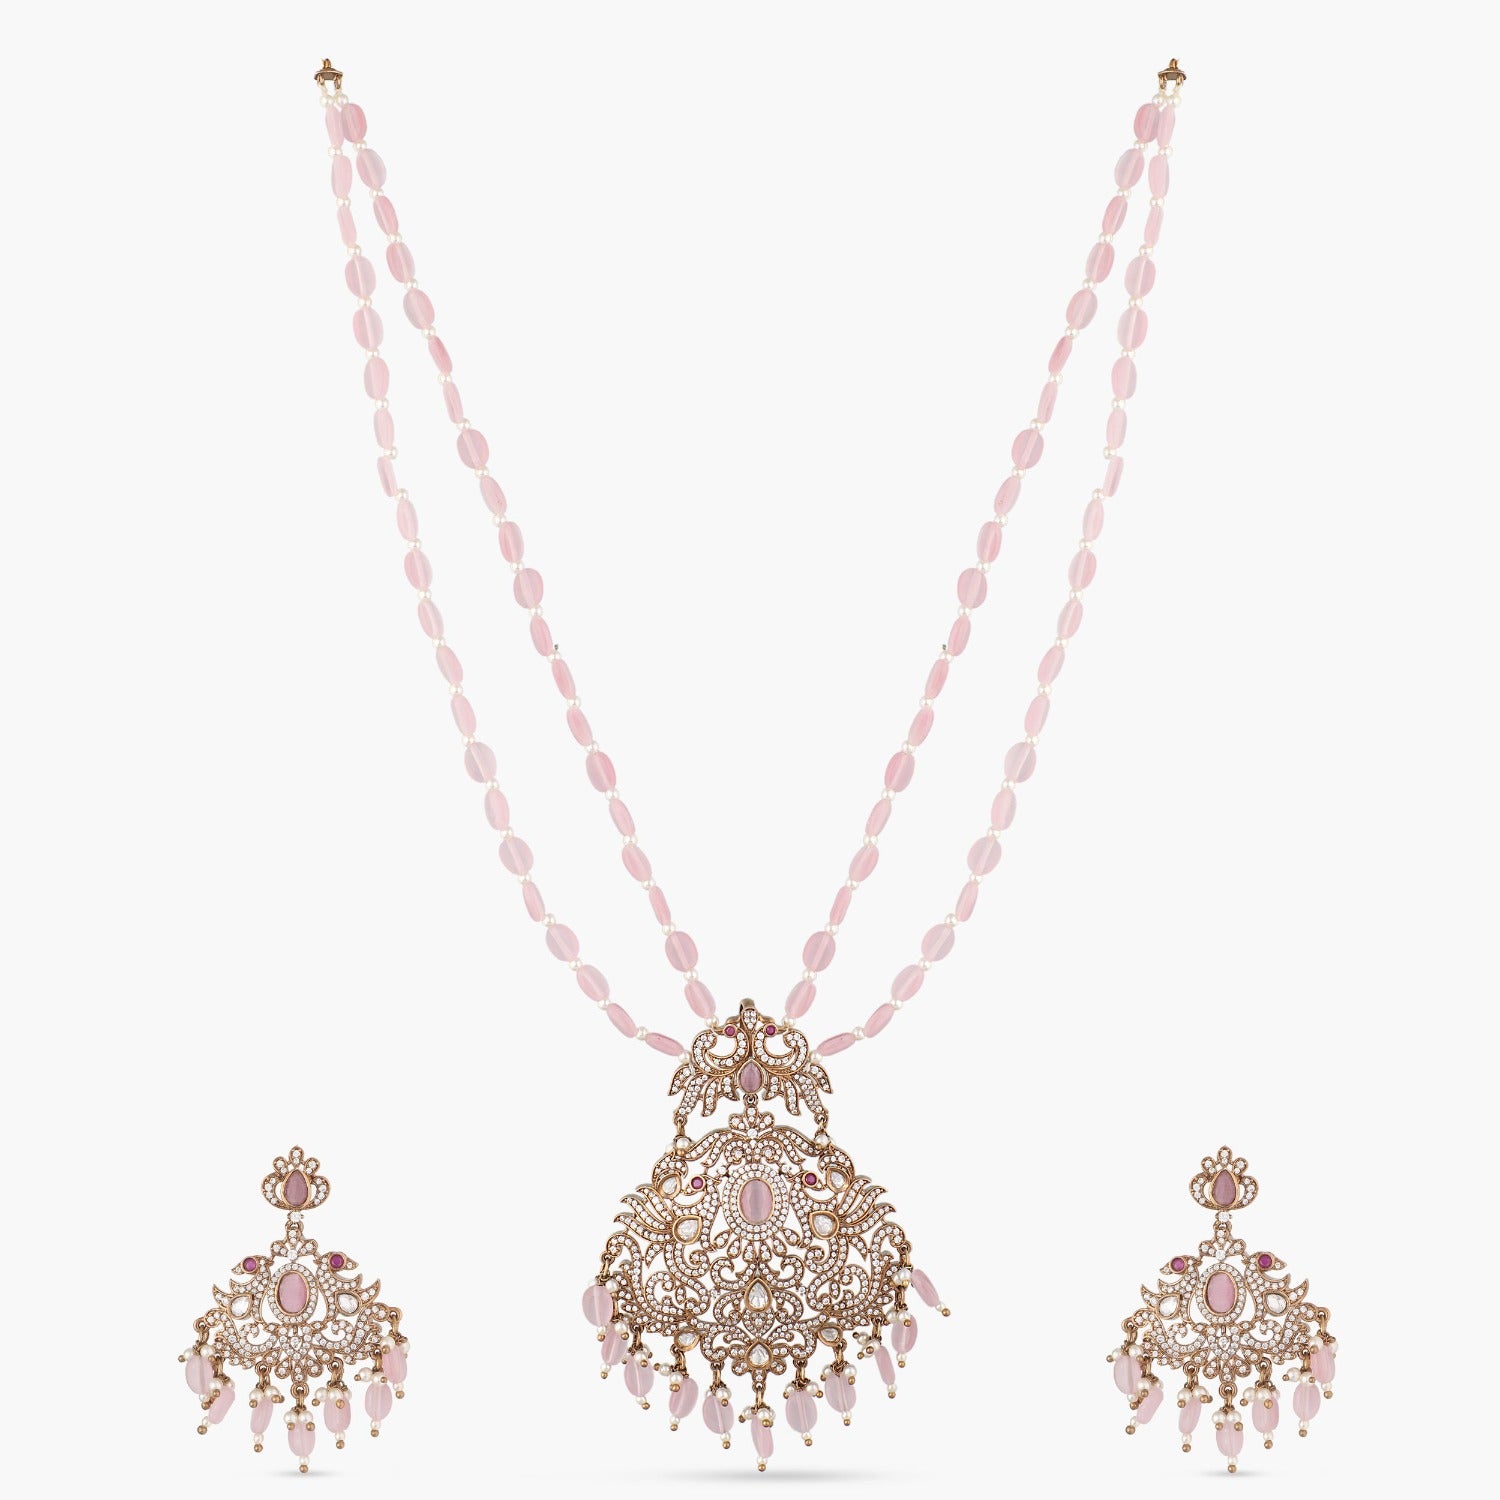 A picture of Indian artificial jewelry. It is a pink colored necklace and earring set with intricate beadwork.